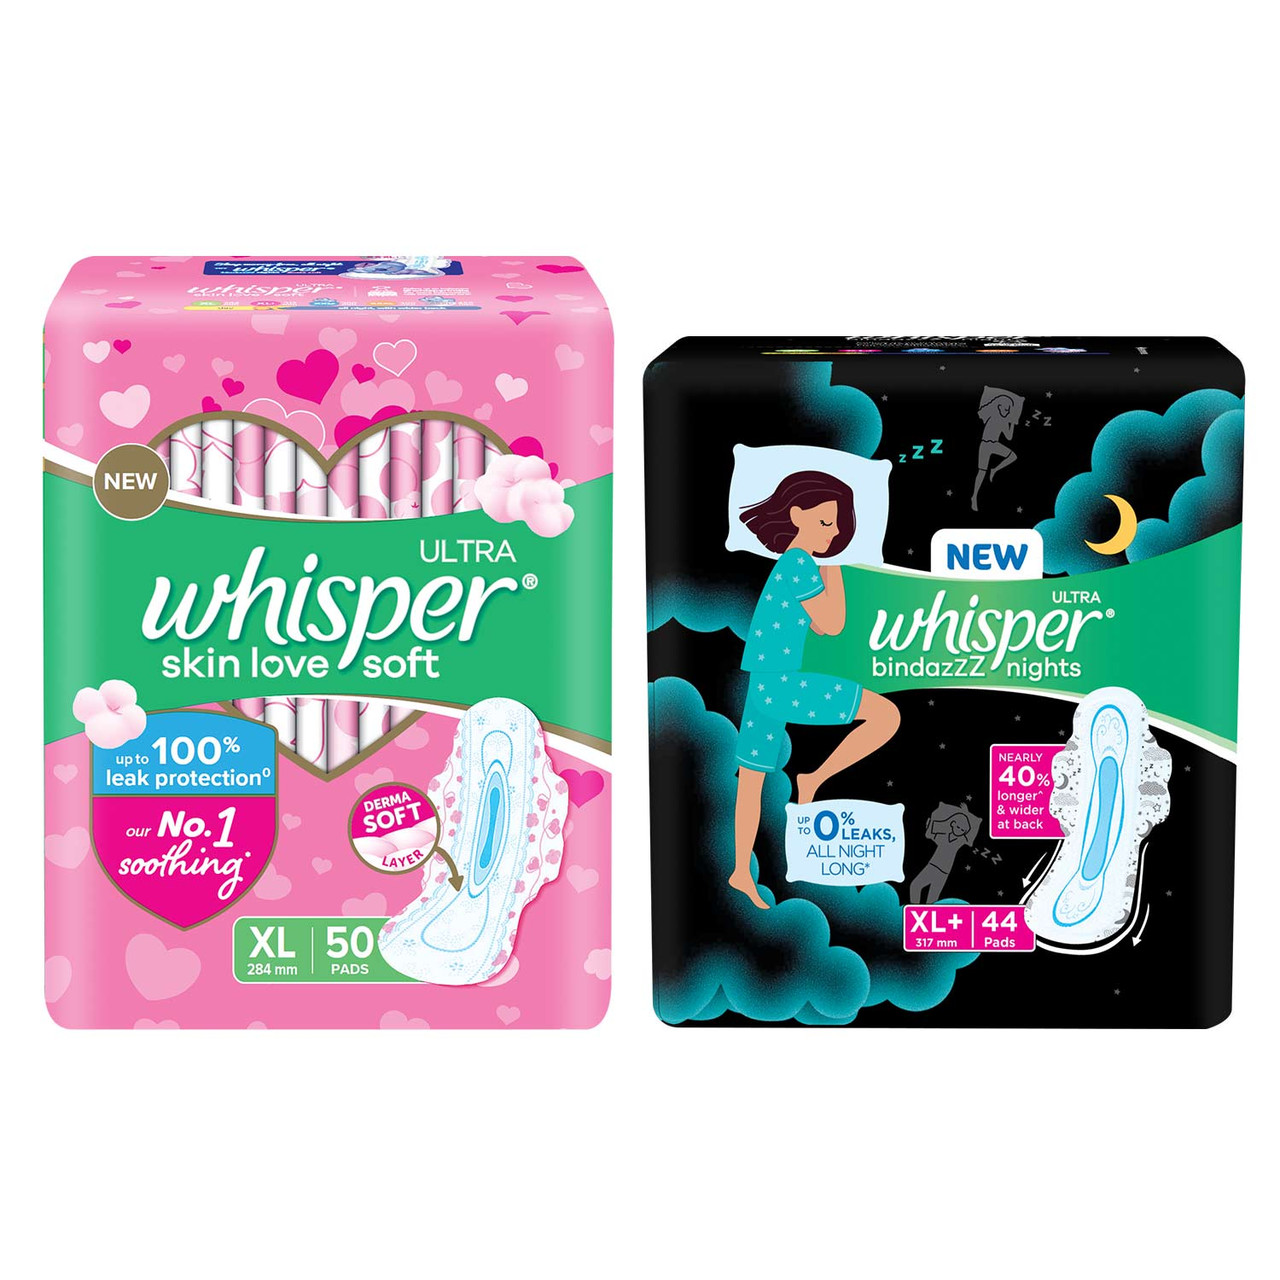 Buy Whisper Bindazzz Night Sanitary Pads, Pack of 7 thin Pads, XL+, upto 0%  Leaks, 40% Longer & Wider back, Dry top sheet, Long lasting coverage, Faster  absorption, 31.7 cm Long